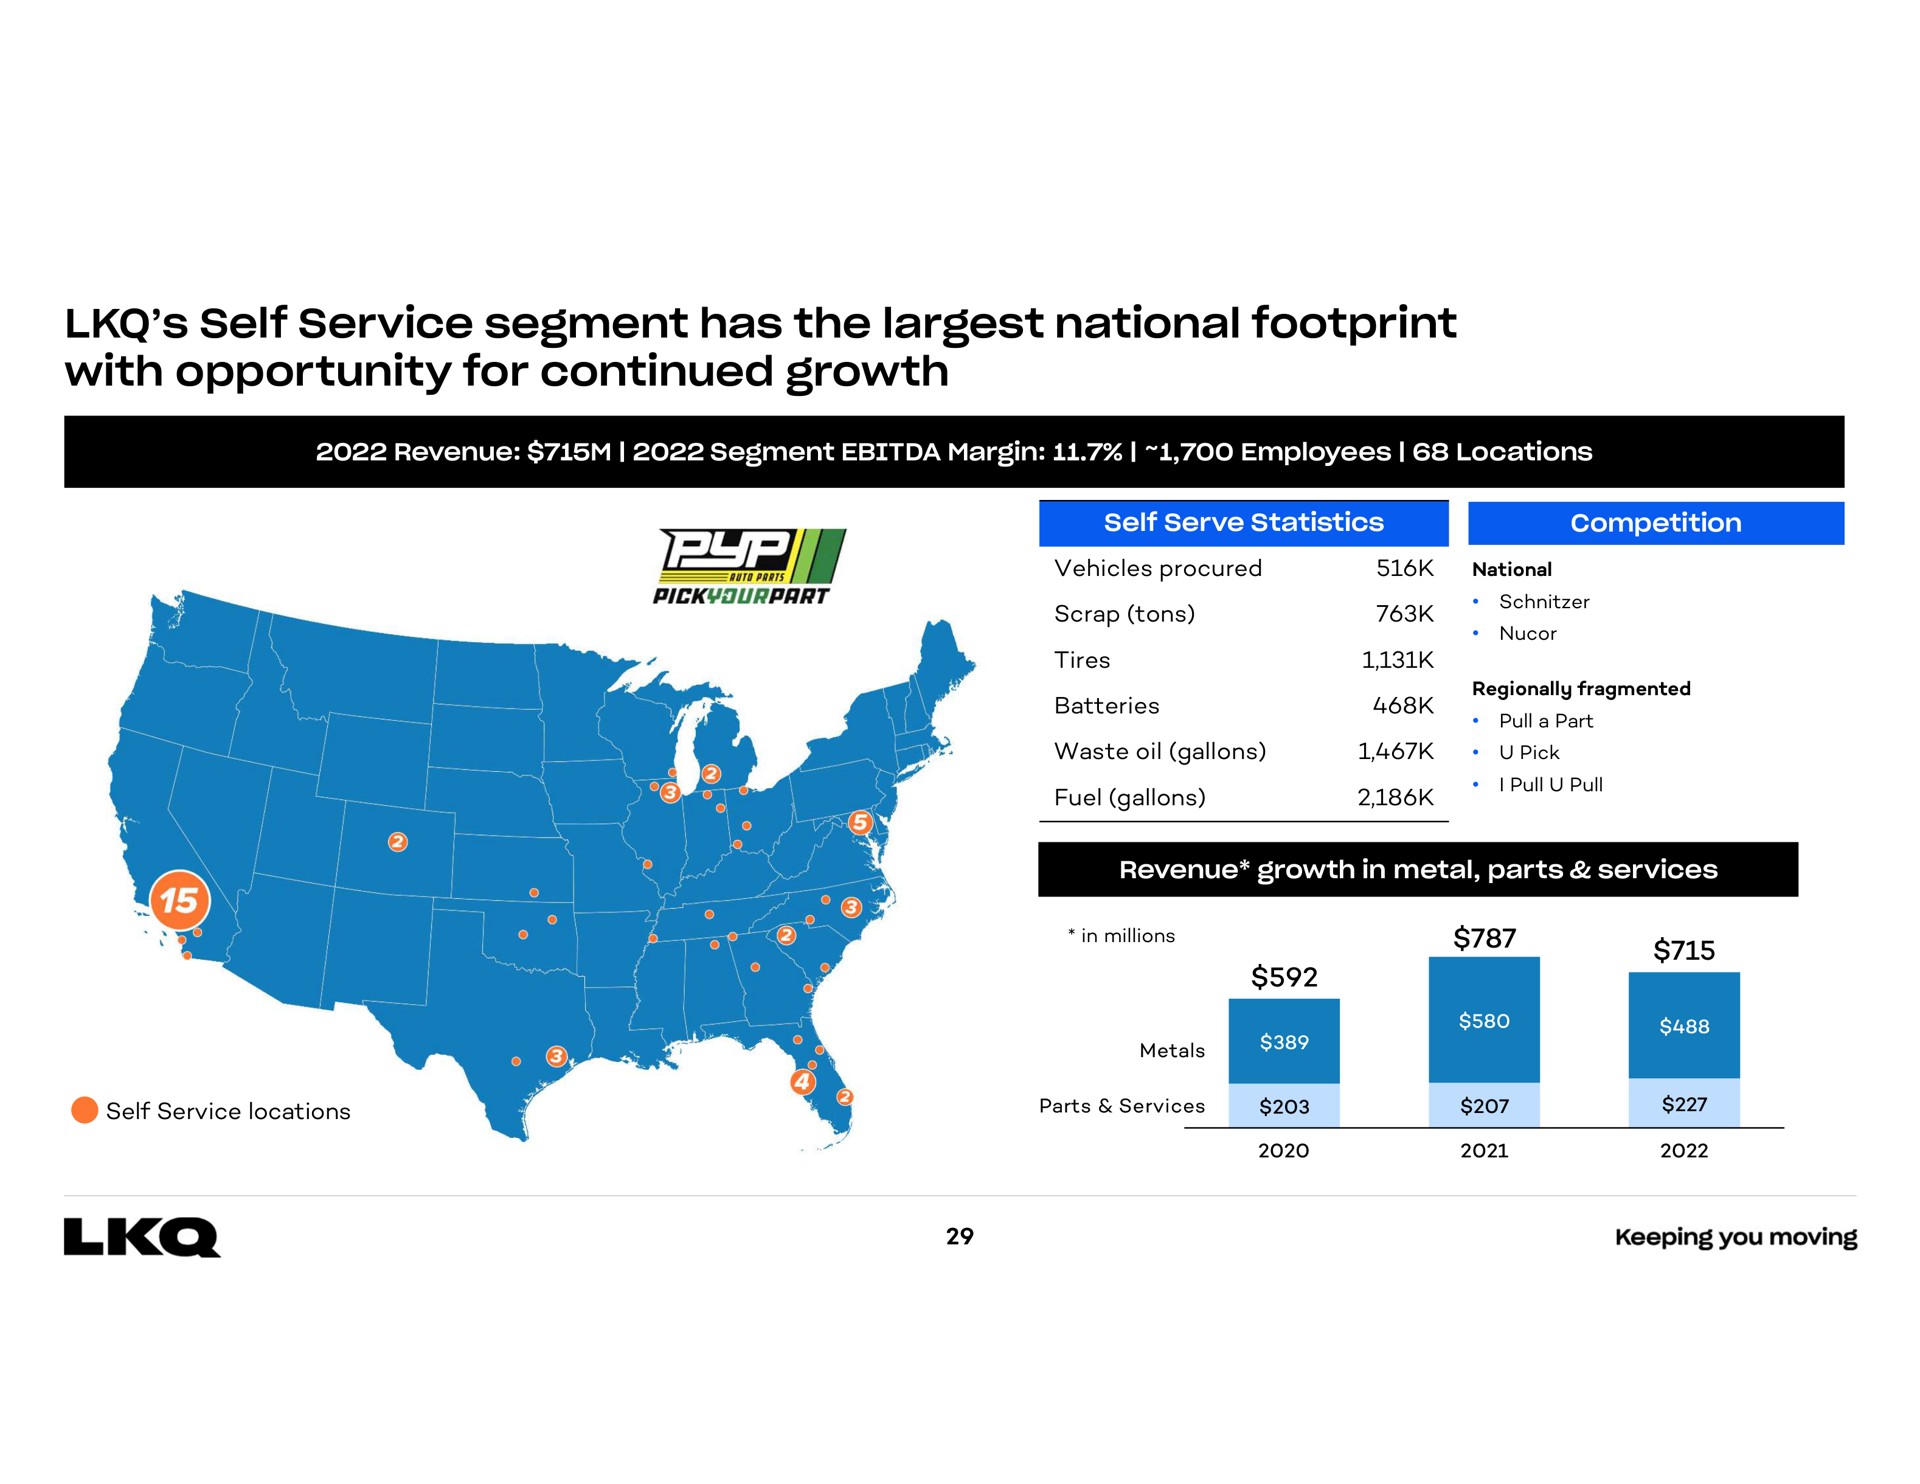 self service segment has the national footprint with opportunity for continued growth | LKQ